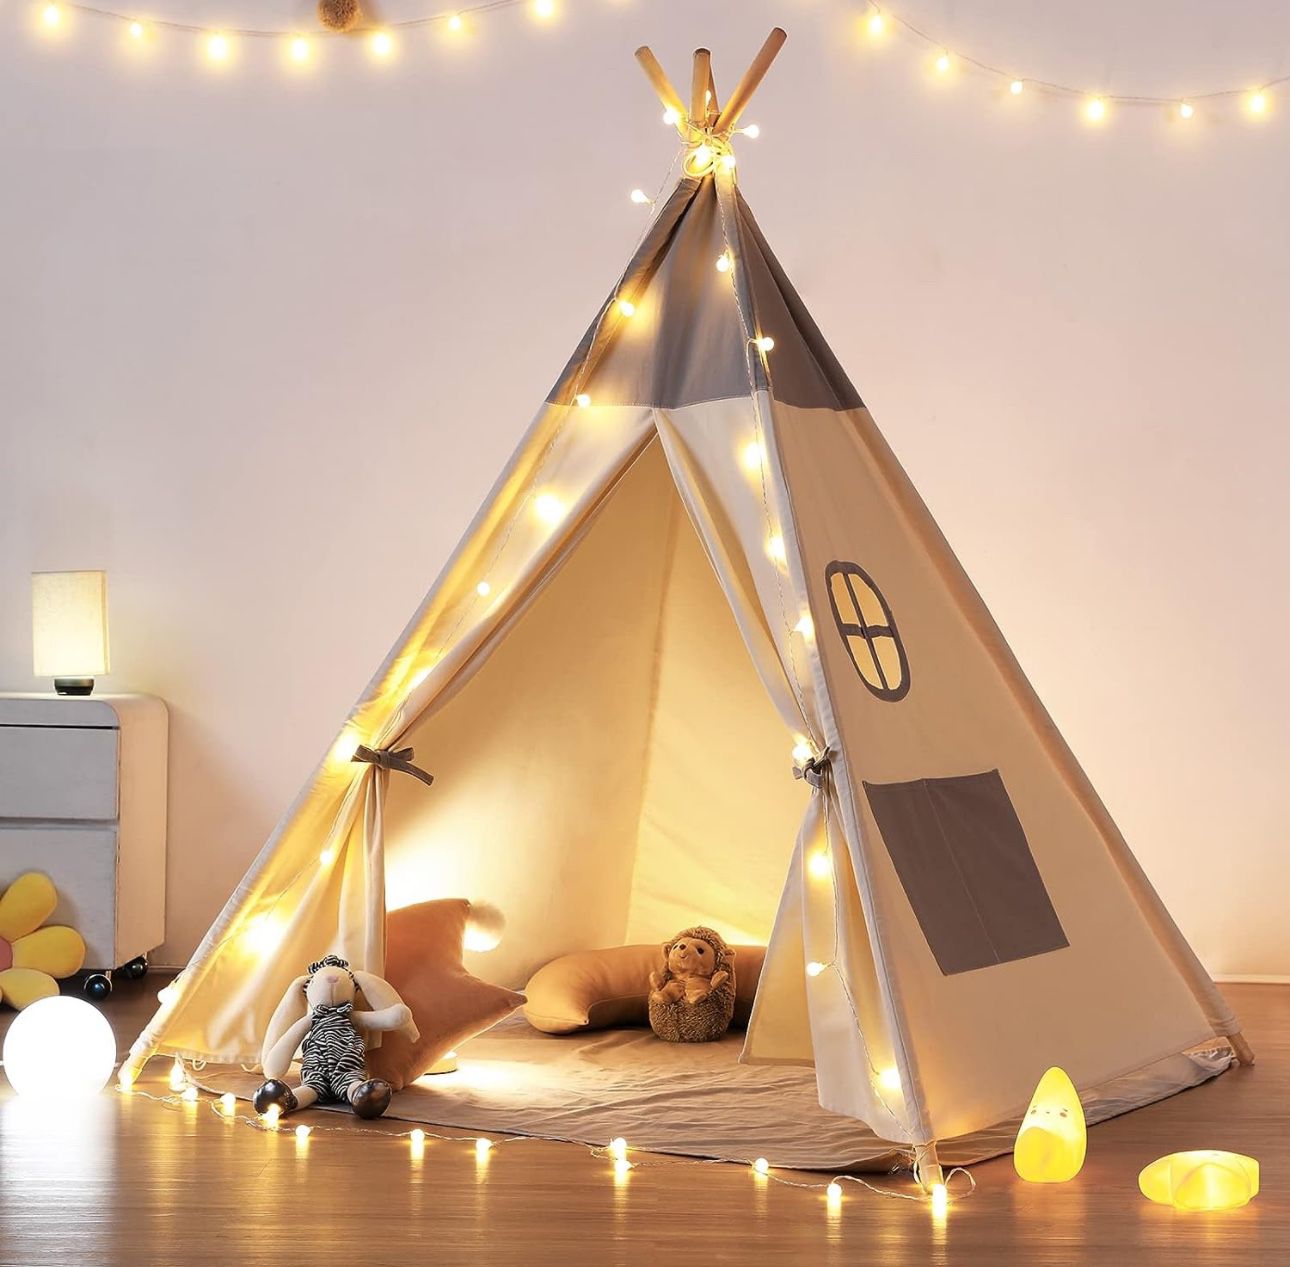 besrey Teepee Tent for Kids with Light & Mat, Kids Tents Indoor Play Tent Playhouse, Toddler Teepee 100% Cotton, tee Pee Tents for Kids Indoor, Kids T